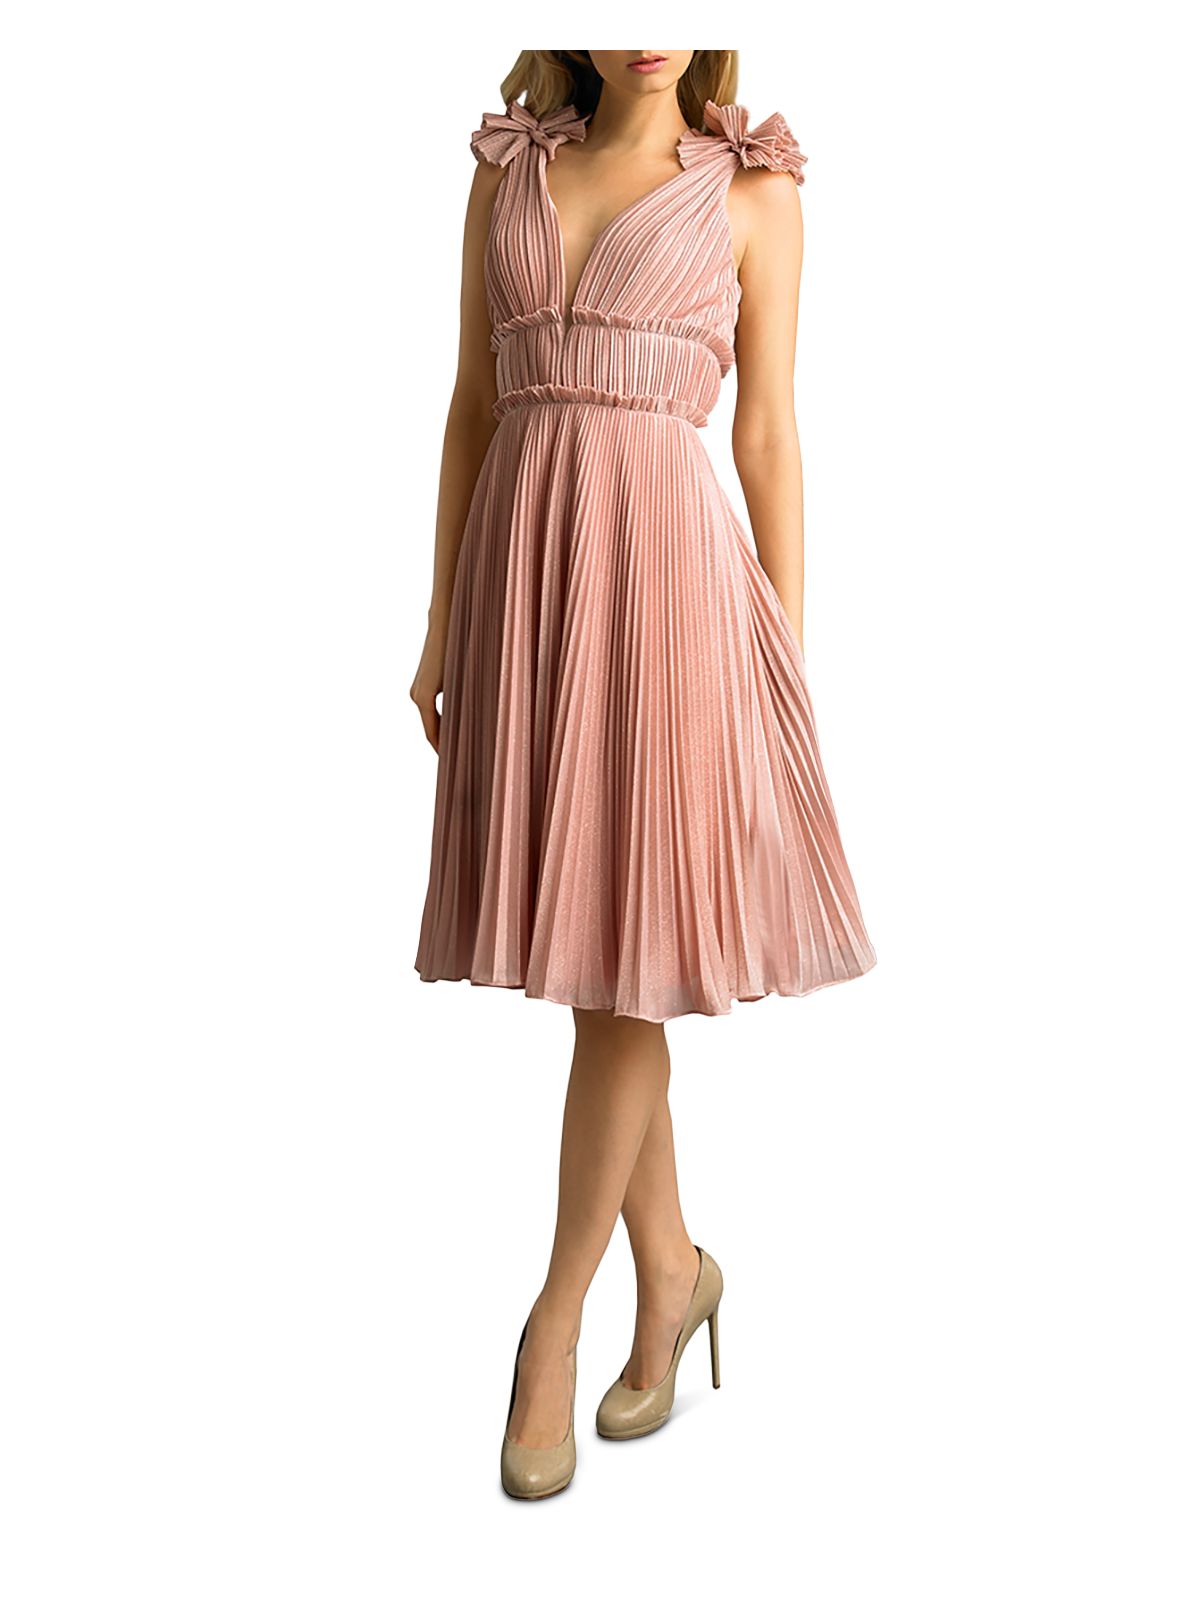 Basix Womens Pink Pleated Bows Added On Straps Spaghetti Strap V Neck Below The Knee Evening Fit + Flare Dress 6